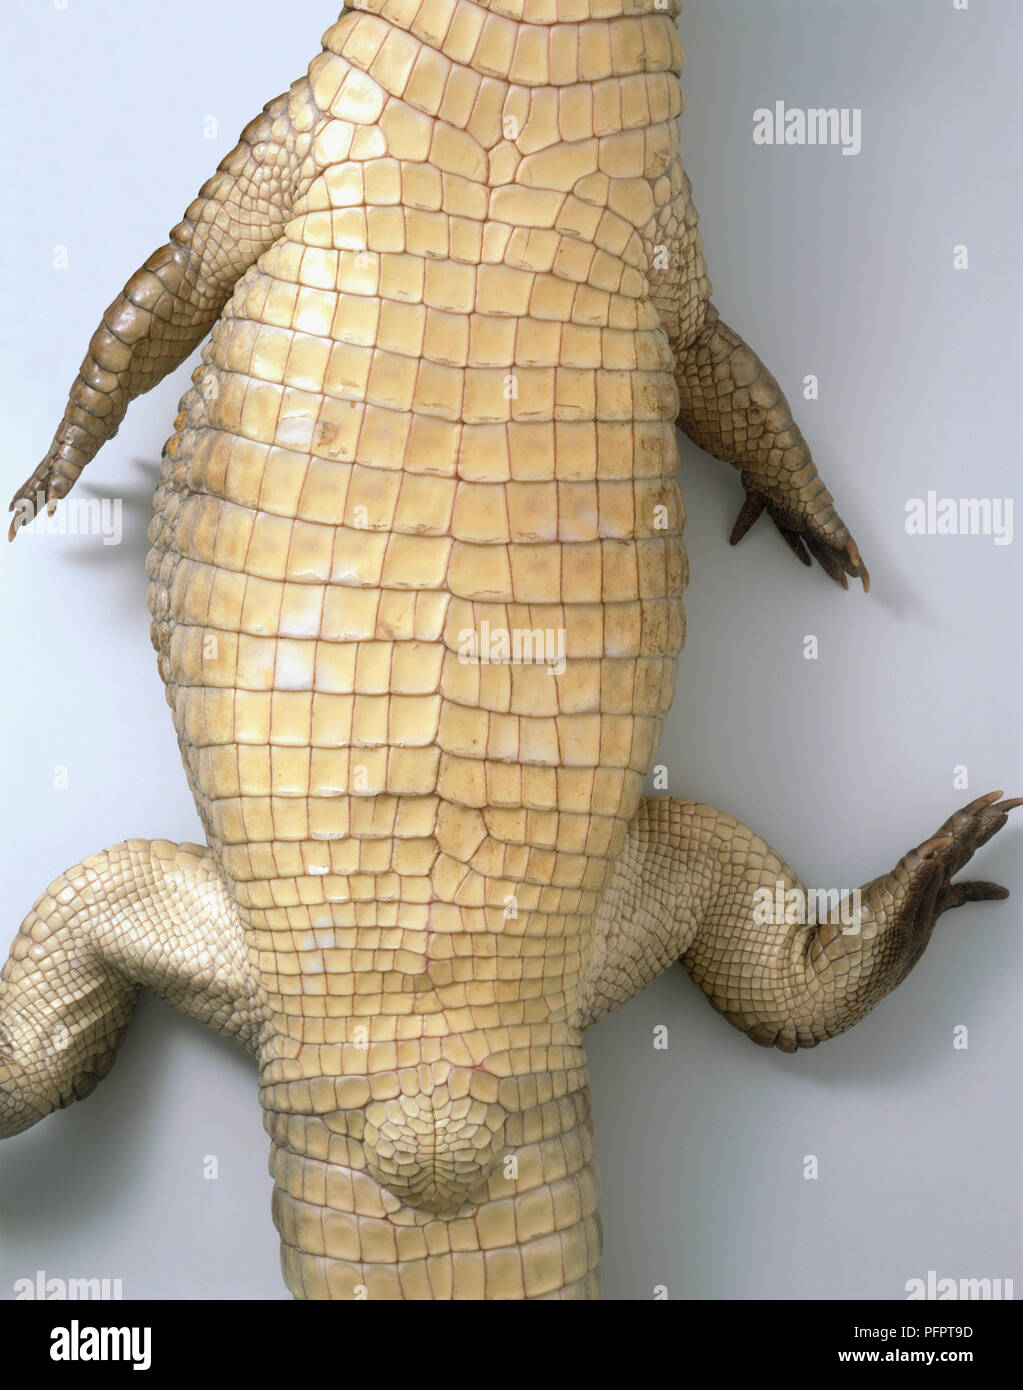 Belly of caiman, close-up Stock Photo - Alamy